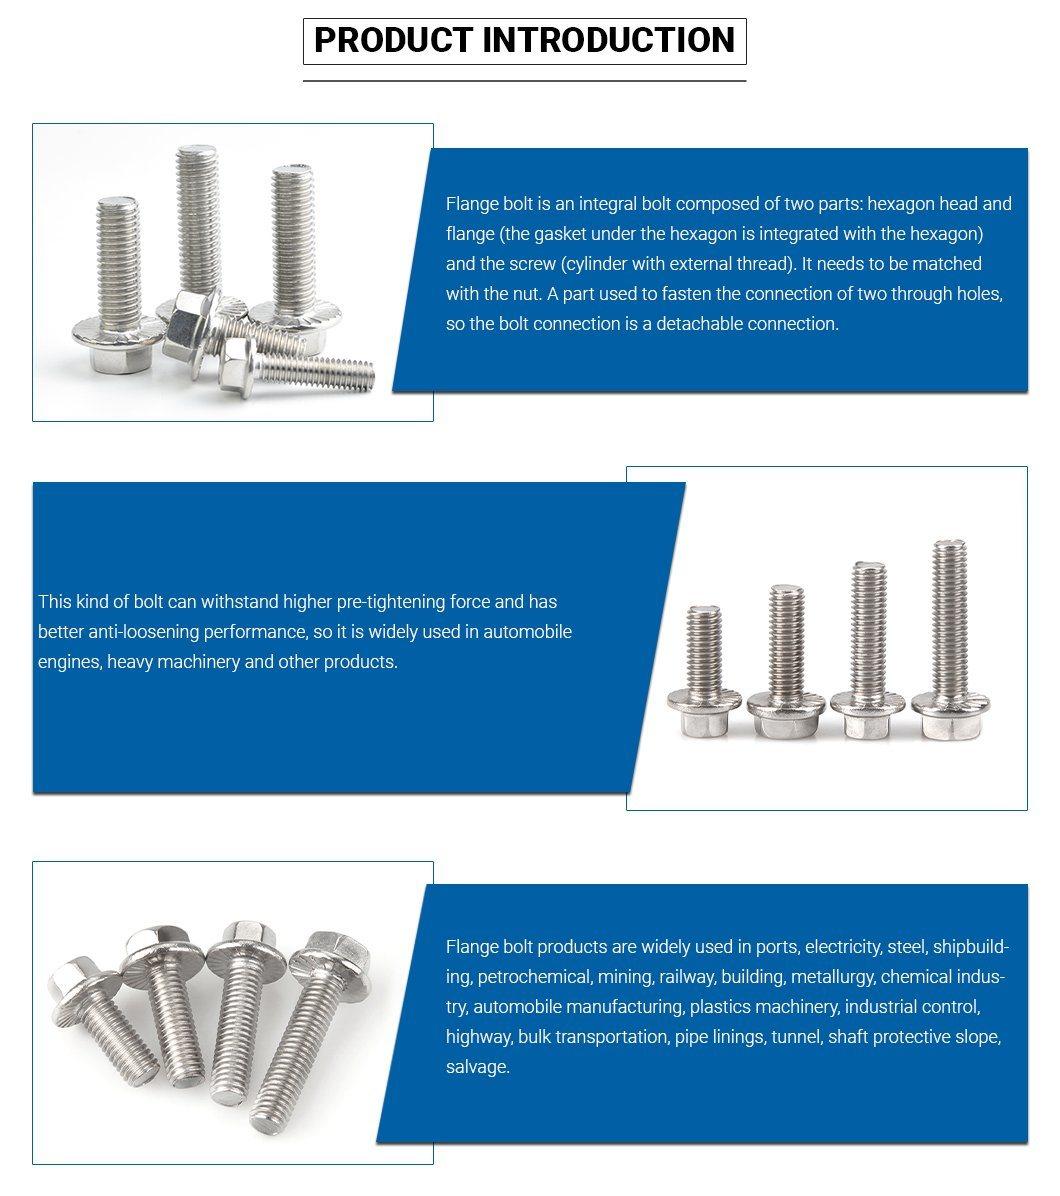 A2 Stainless Steel 304 Machine Fasteners Flange Bolt